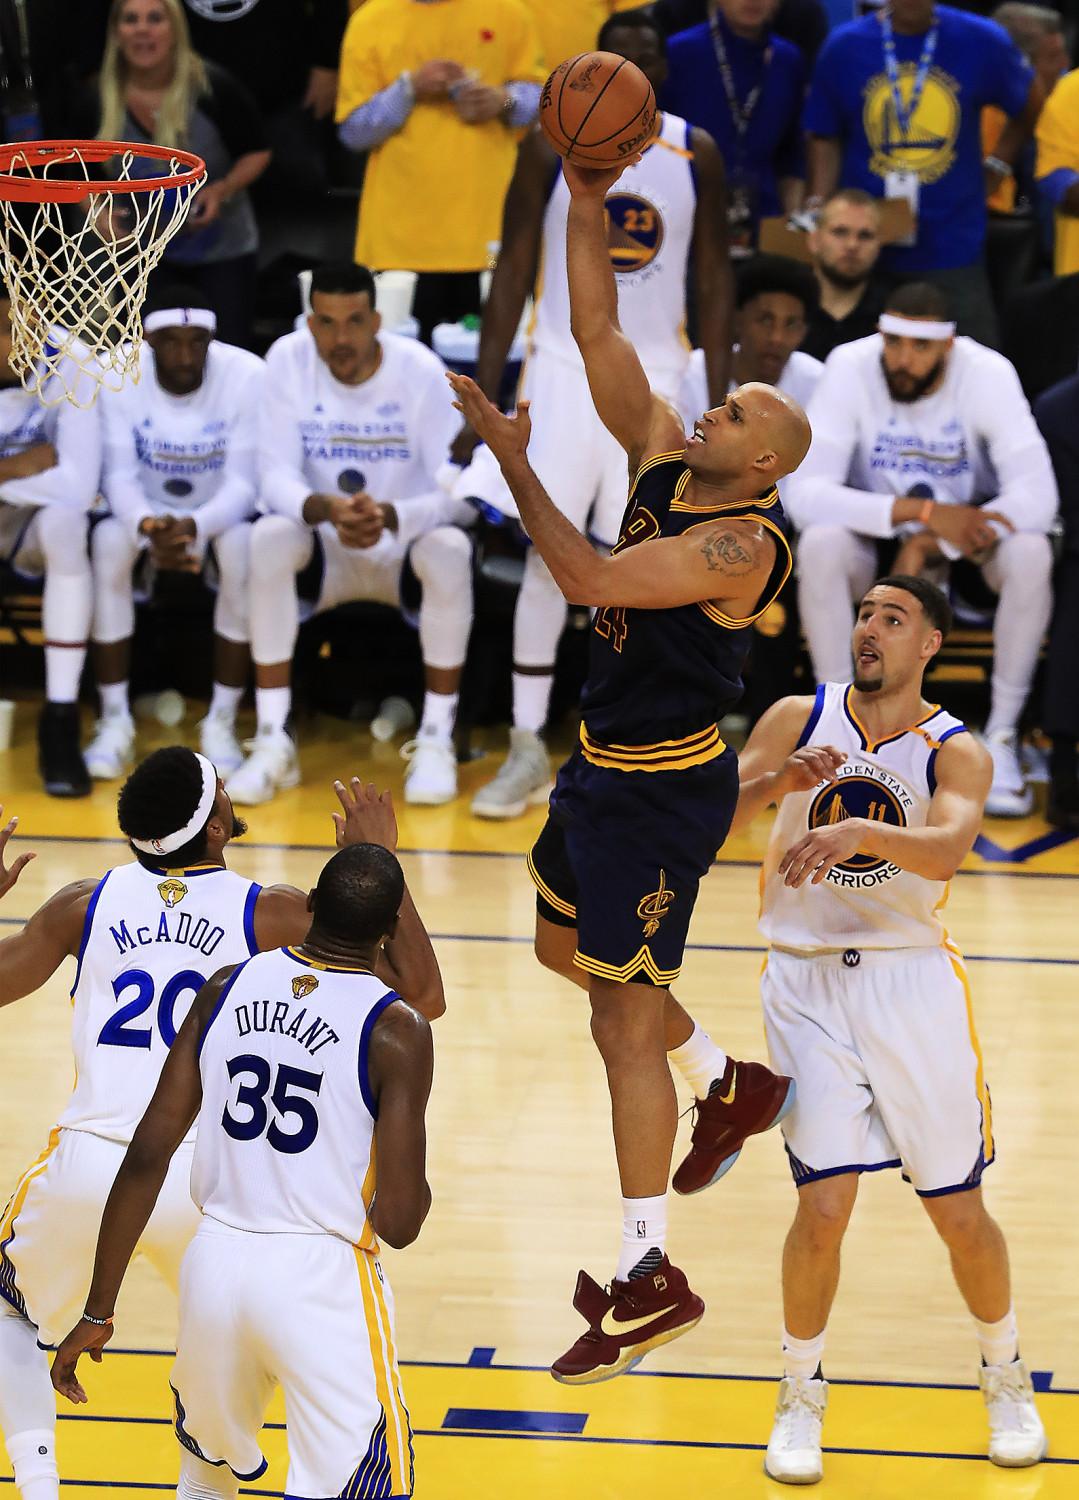 Richard Jefferson No. 24 of the Cleveland Cavaliers attempts a shot against the Golden State Warriors during Game 1 of the 2017 NBA Finals in Oakland, Calif., June 1, 2017. (Ronald Martinez/Getty Images)